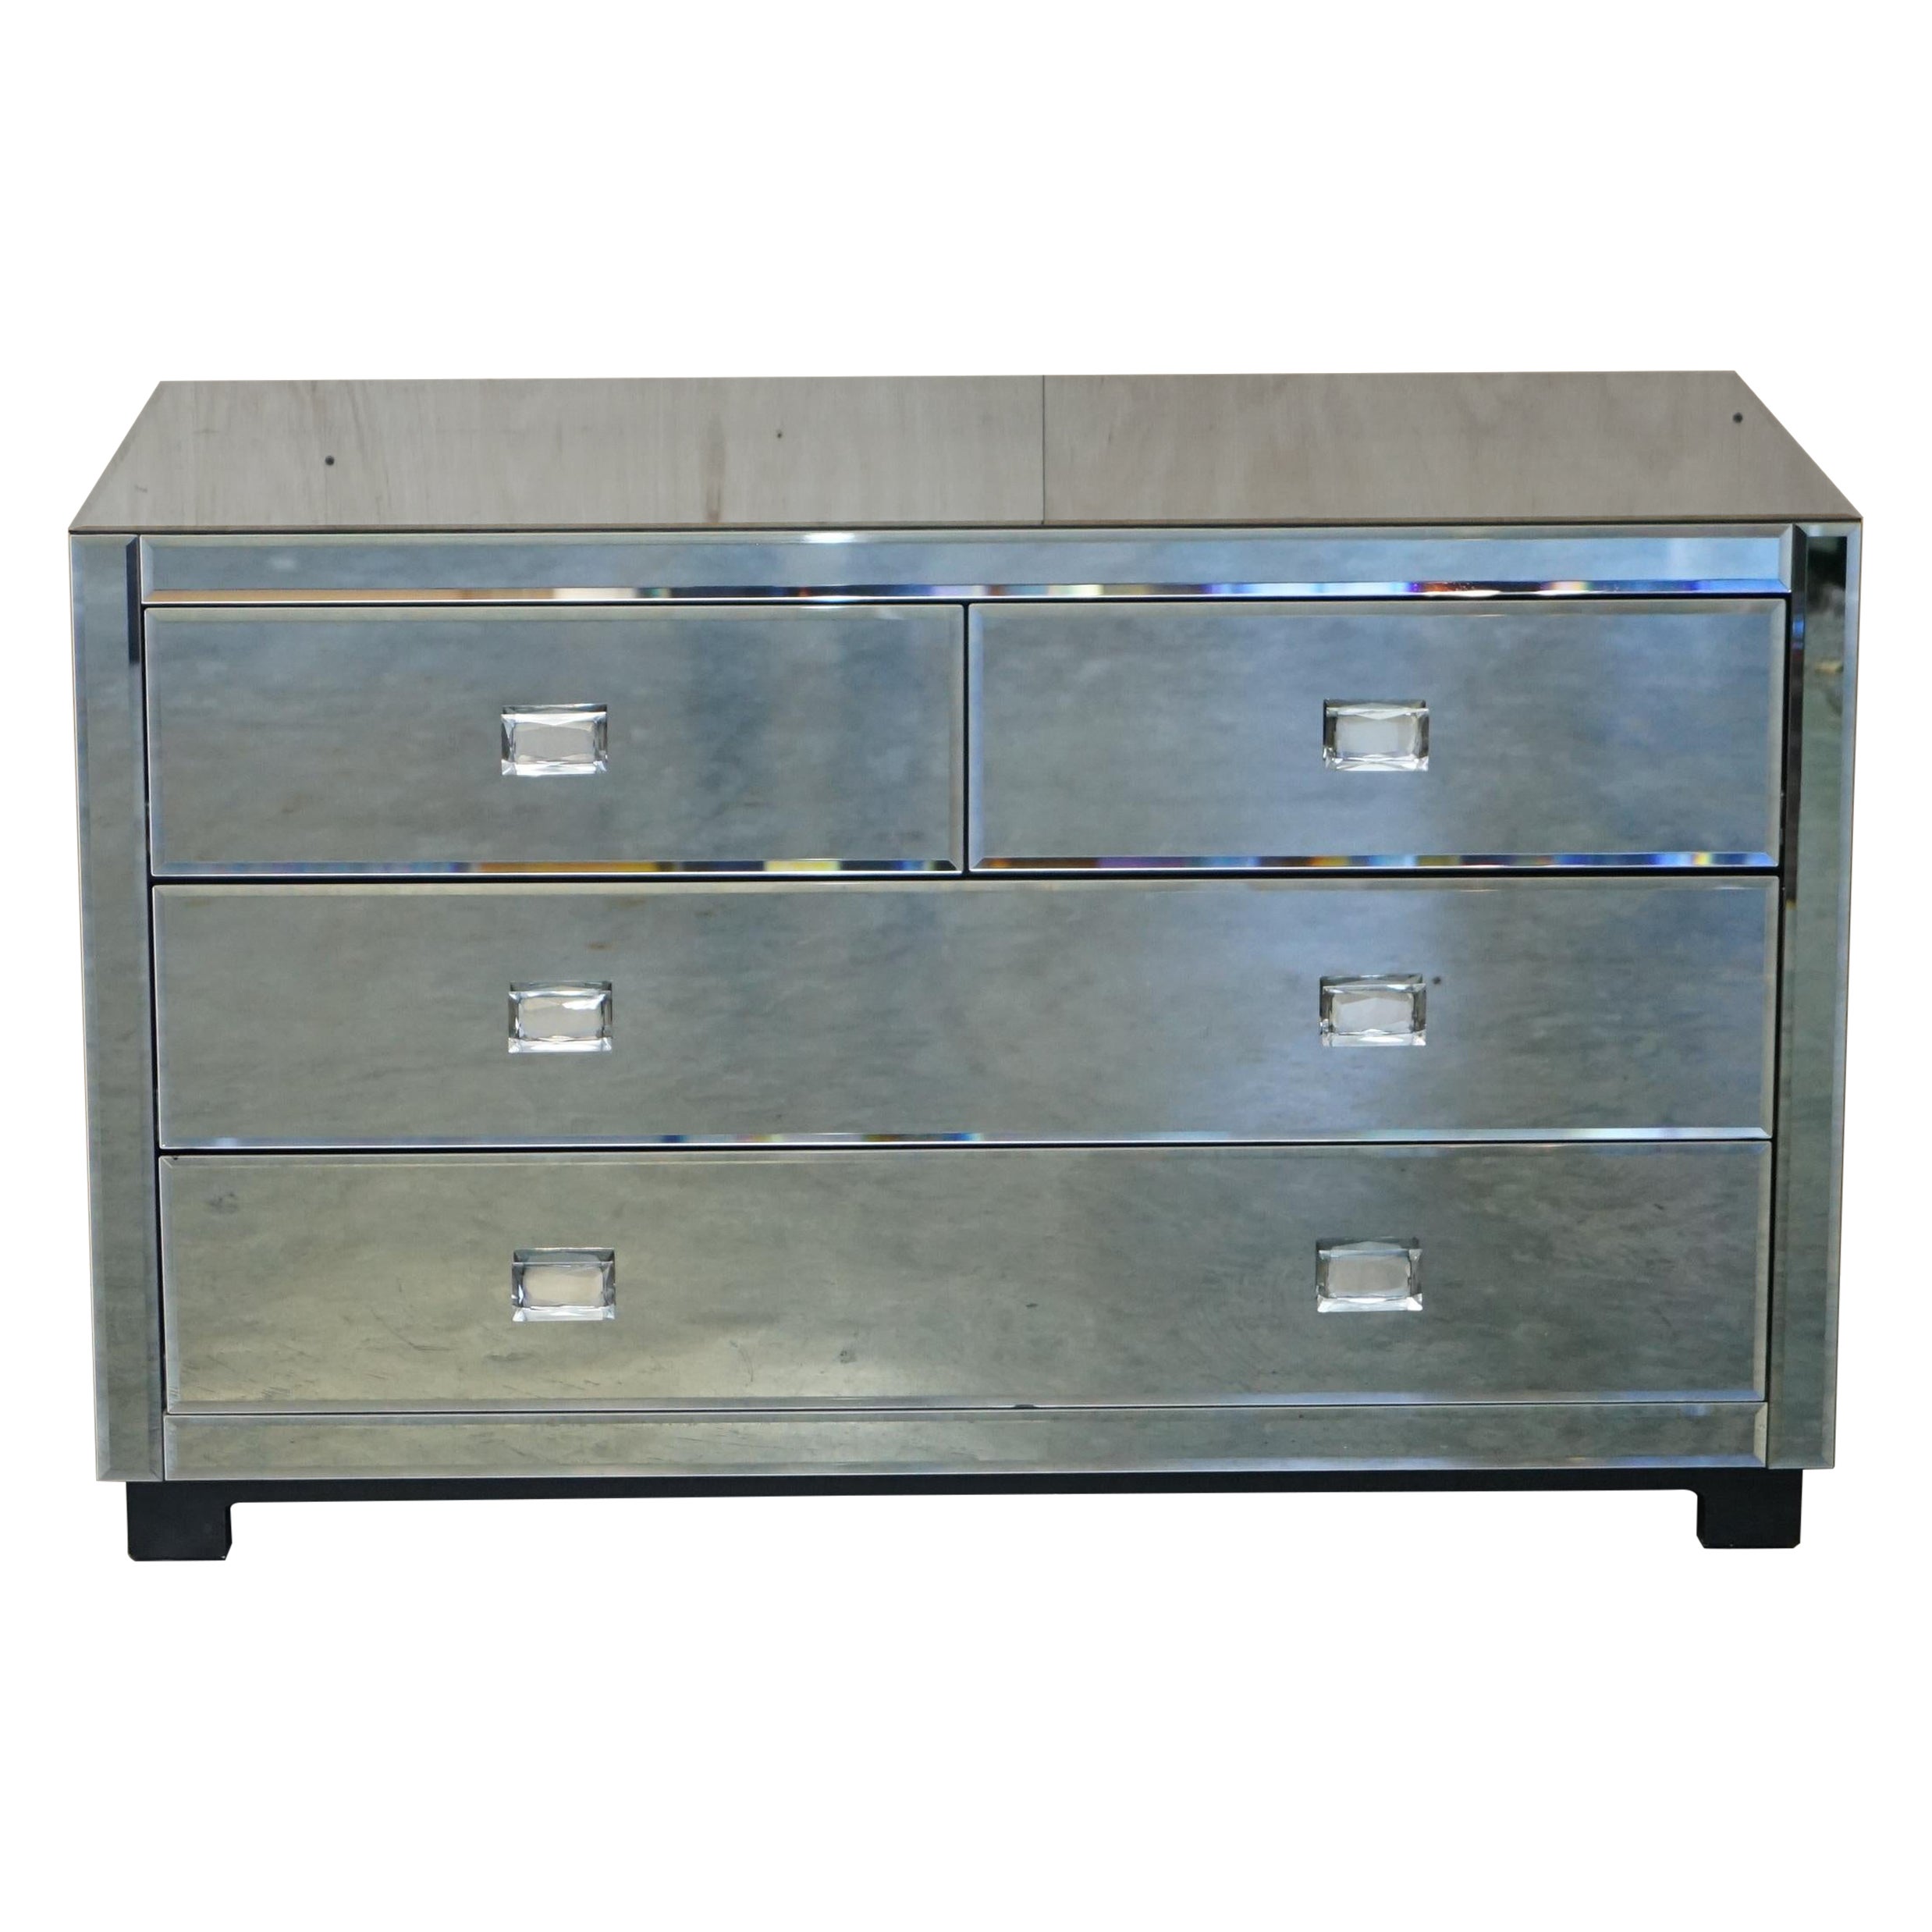 STUNNING CONTEMPORARY EXTRA DEEP OKA FURNiTURE MIRRORED GLASS CHEST OF DRAWERS For Sale